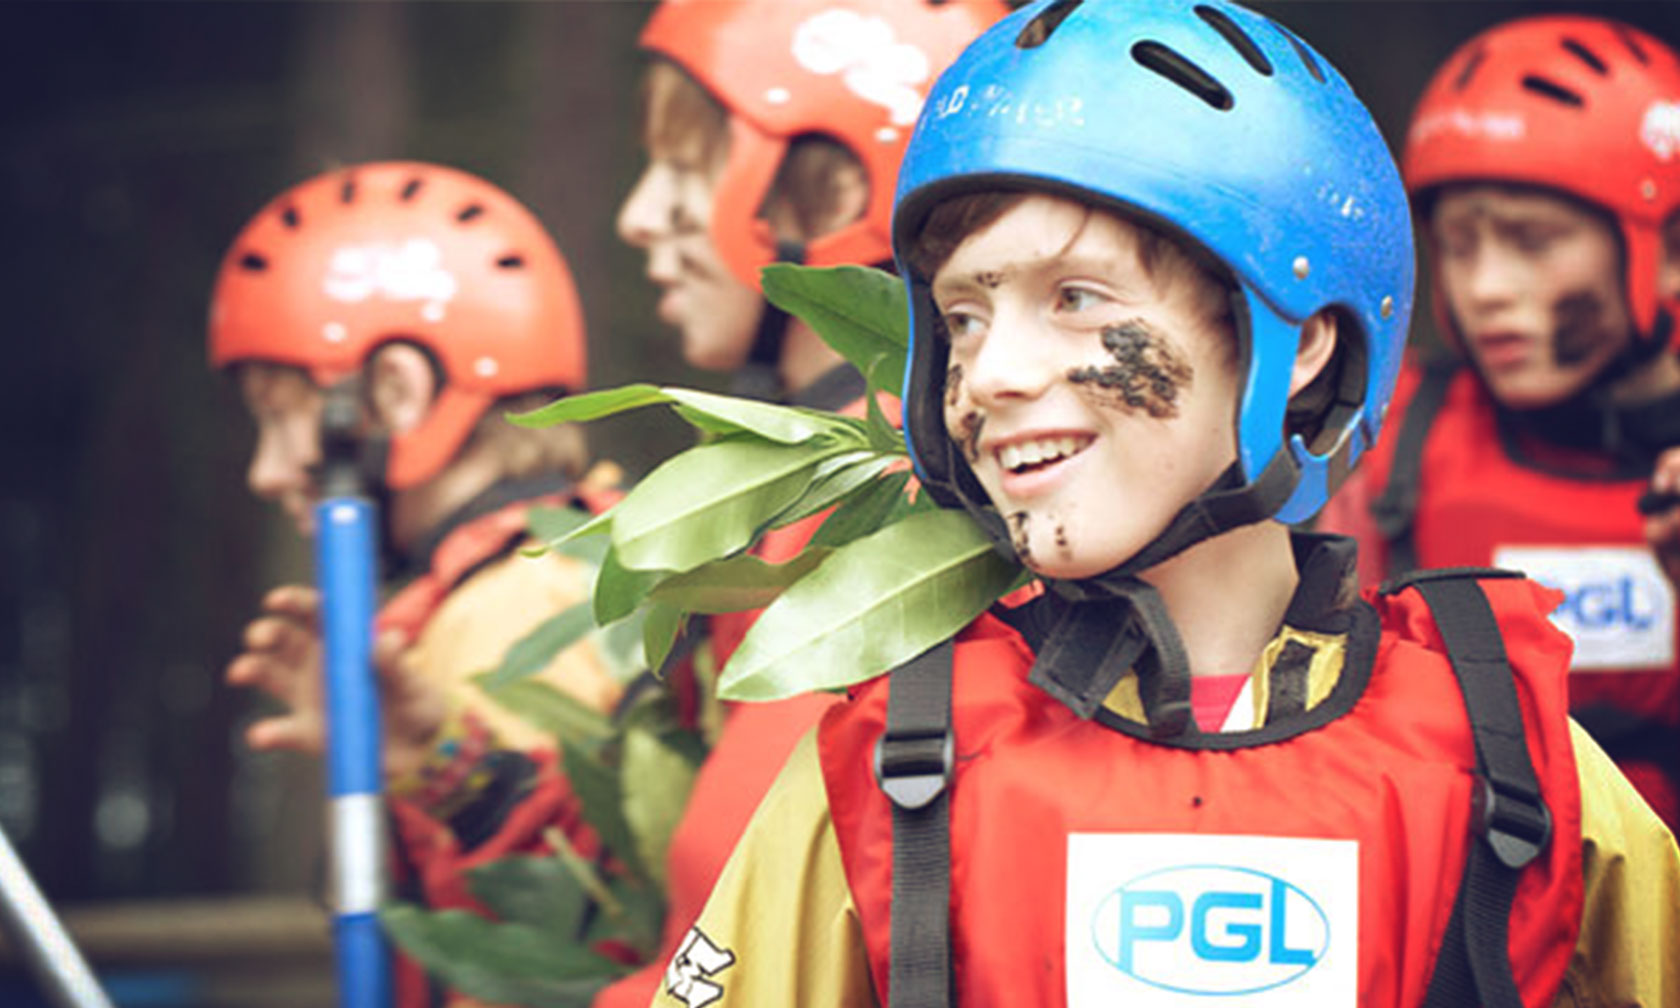 PGL boy with mud on face